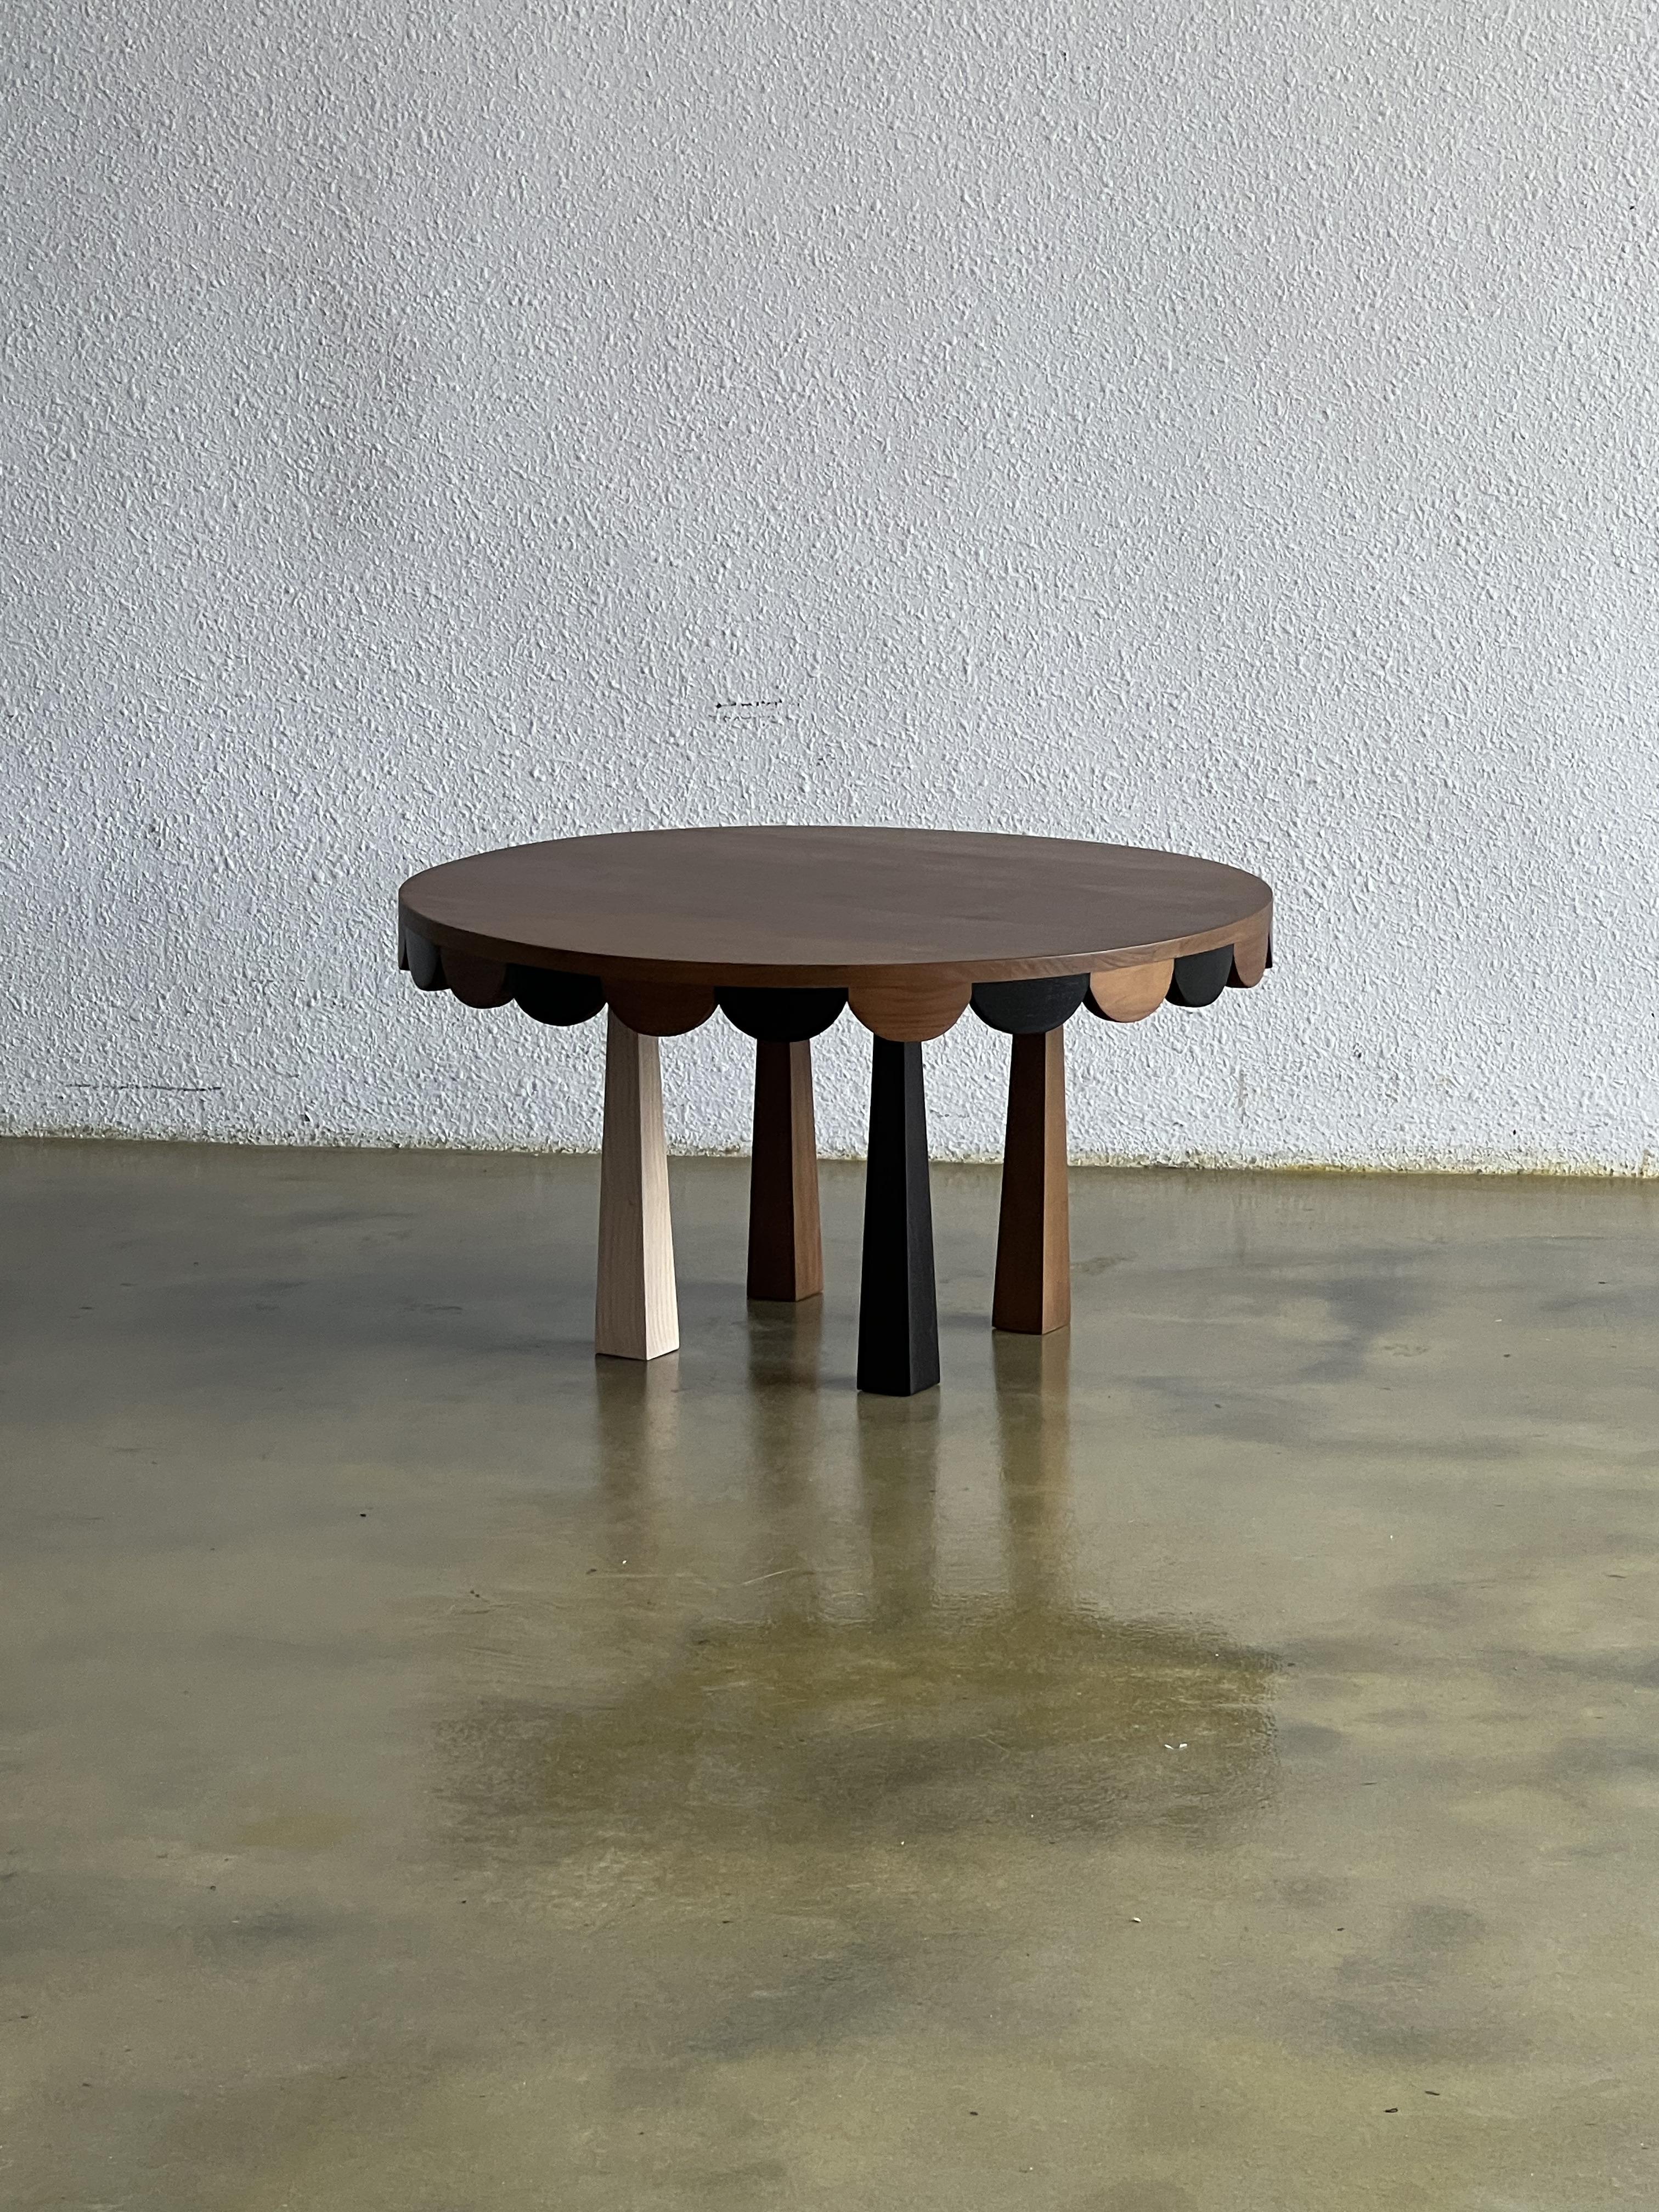 Tent Table by Studio Kallang
Dimensions: W 80 x D 80 x H 42 cm
Materials: Solid Teak, Solid Sungkai.

STUDIO KALLANG IS A SINGAPORE AND SEATTLE BASED PROJECT FOCUSING ON OBJECTS DESIGNED BY FAEZAH SHAHARUDDIN.
PIECES ARE PLAYFUL EXPLORATIONS IN